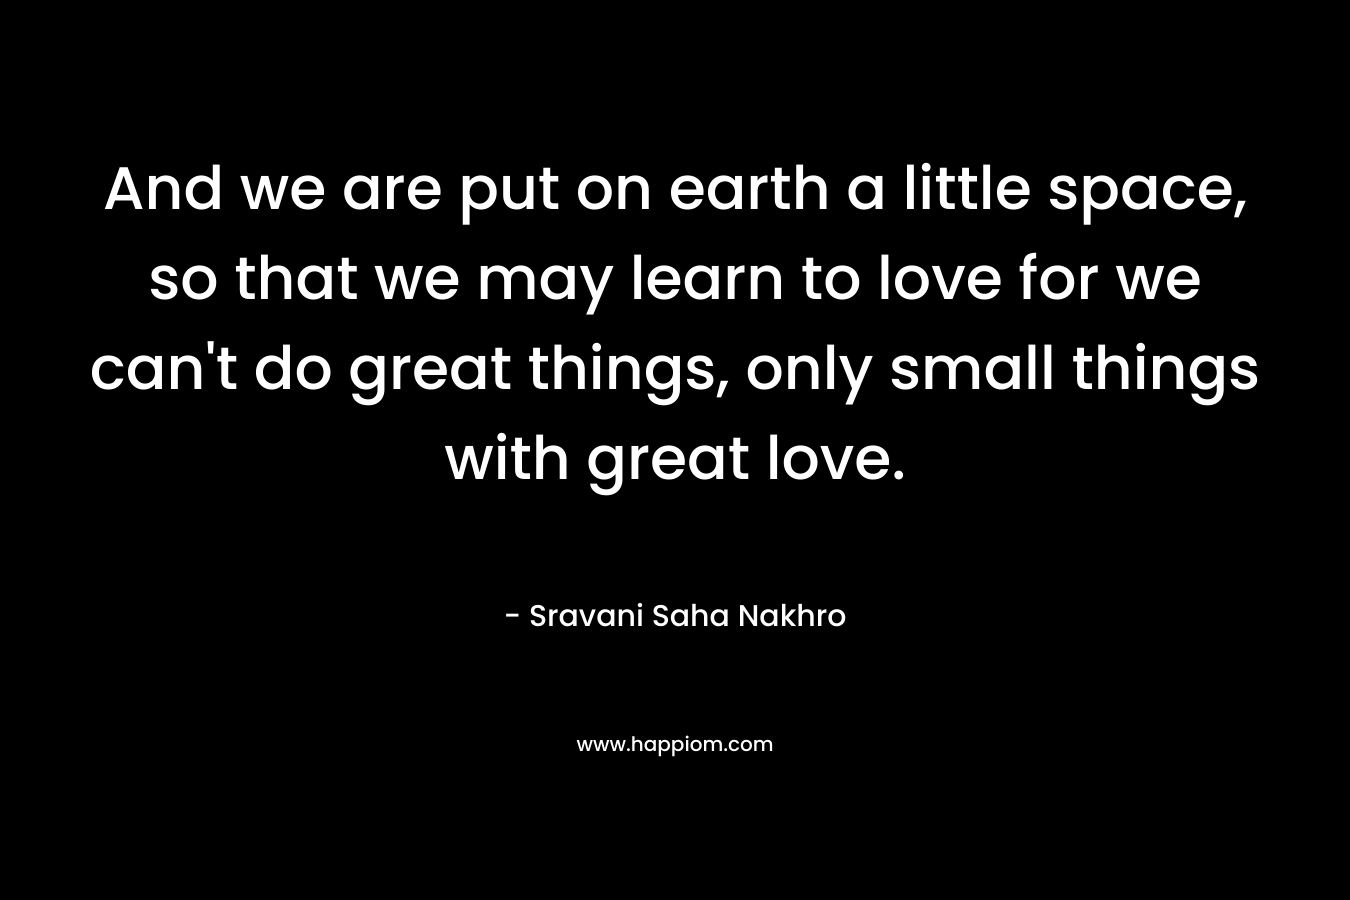 And we are put on earth a little space, so that we may learn to love for we can't do great things, only small things with great love.